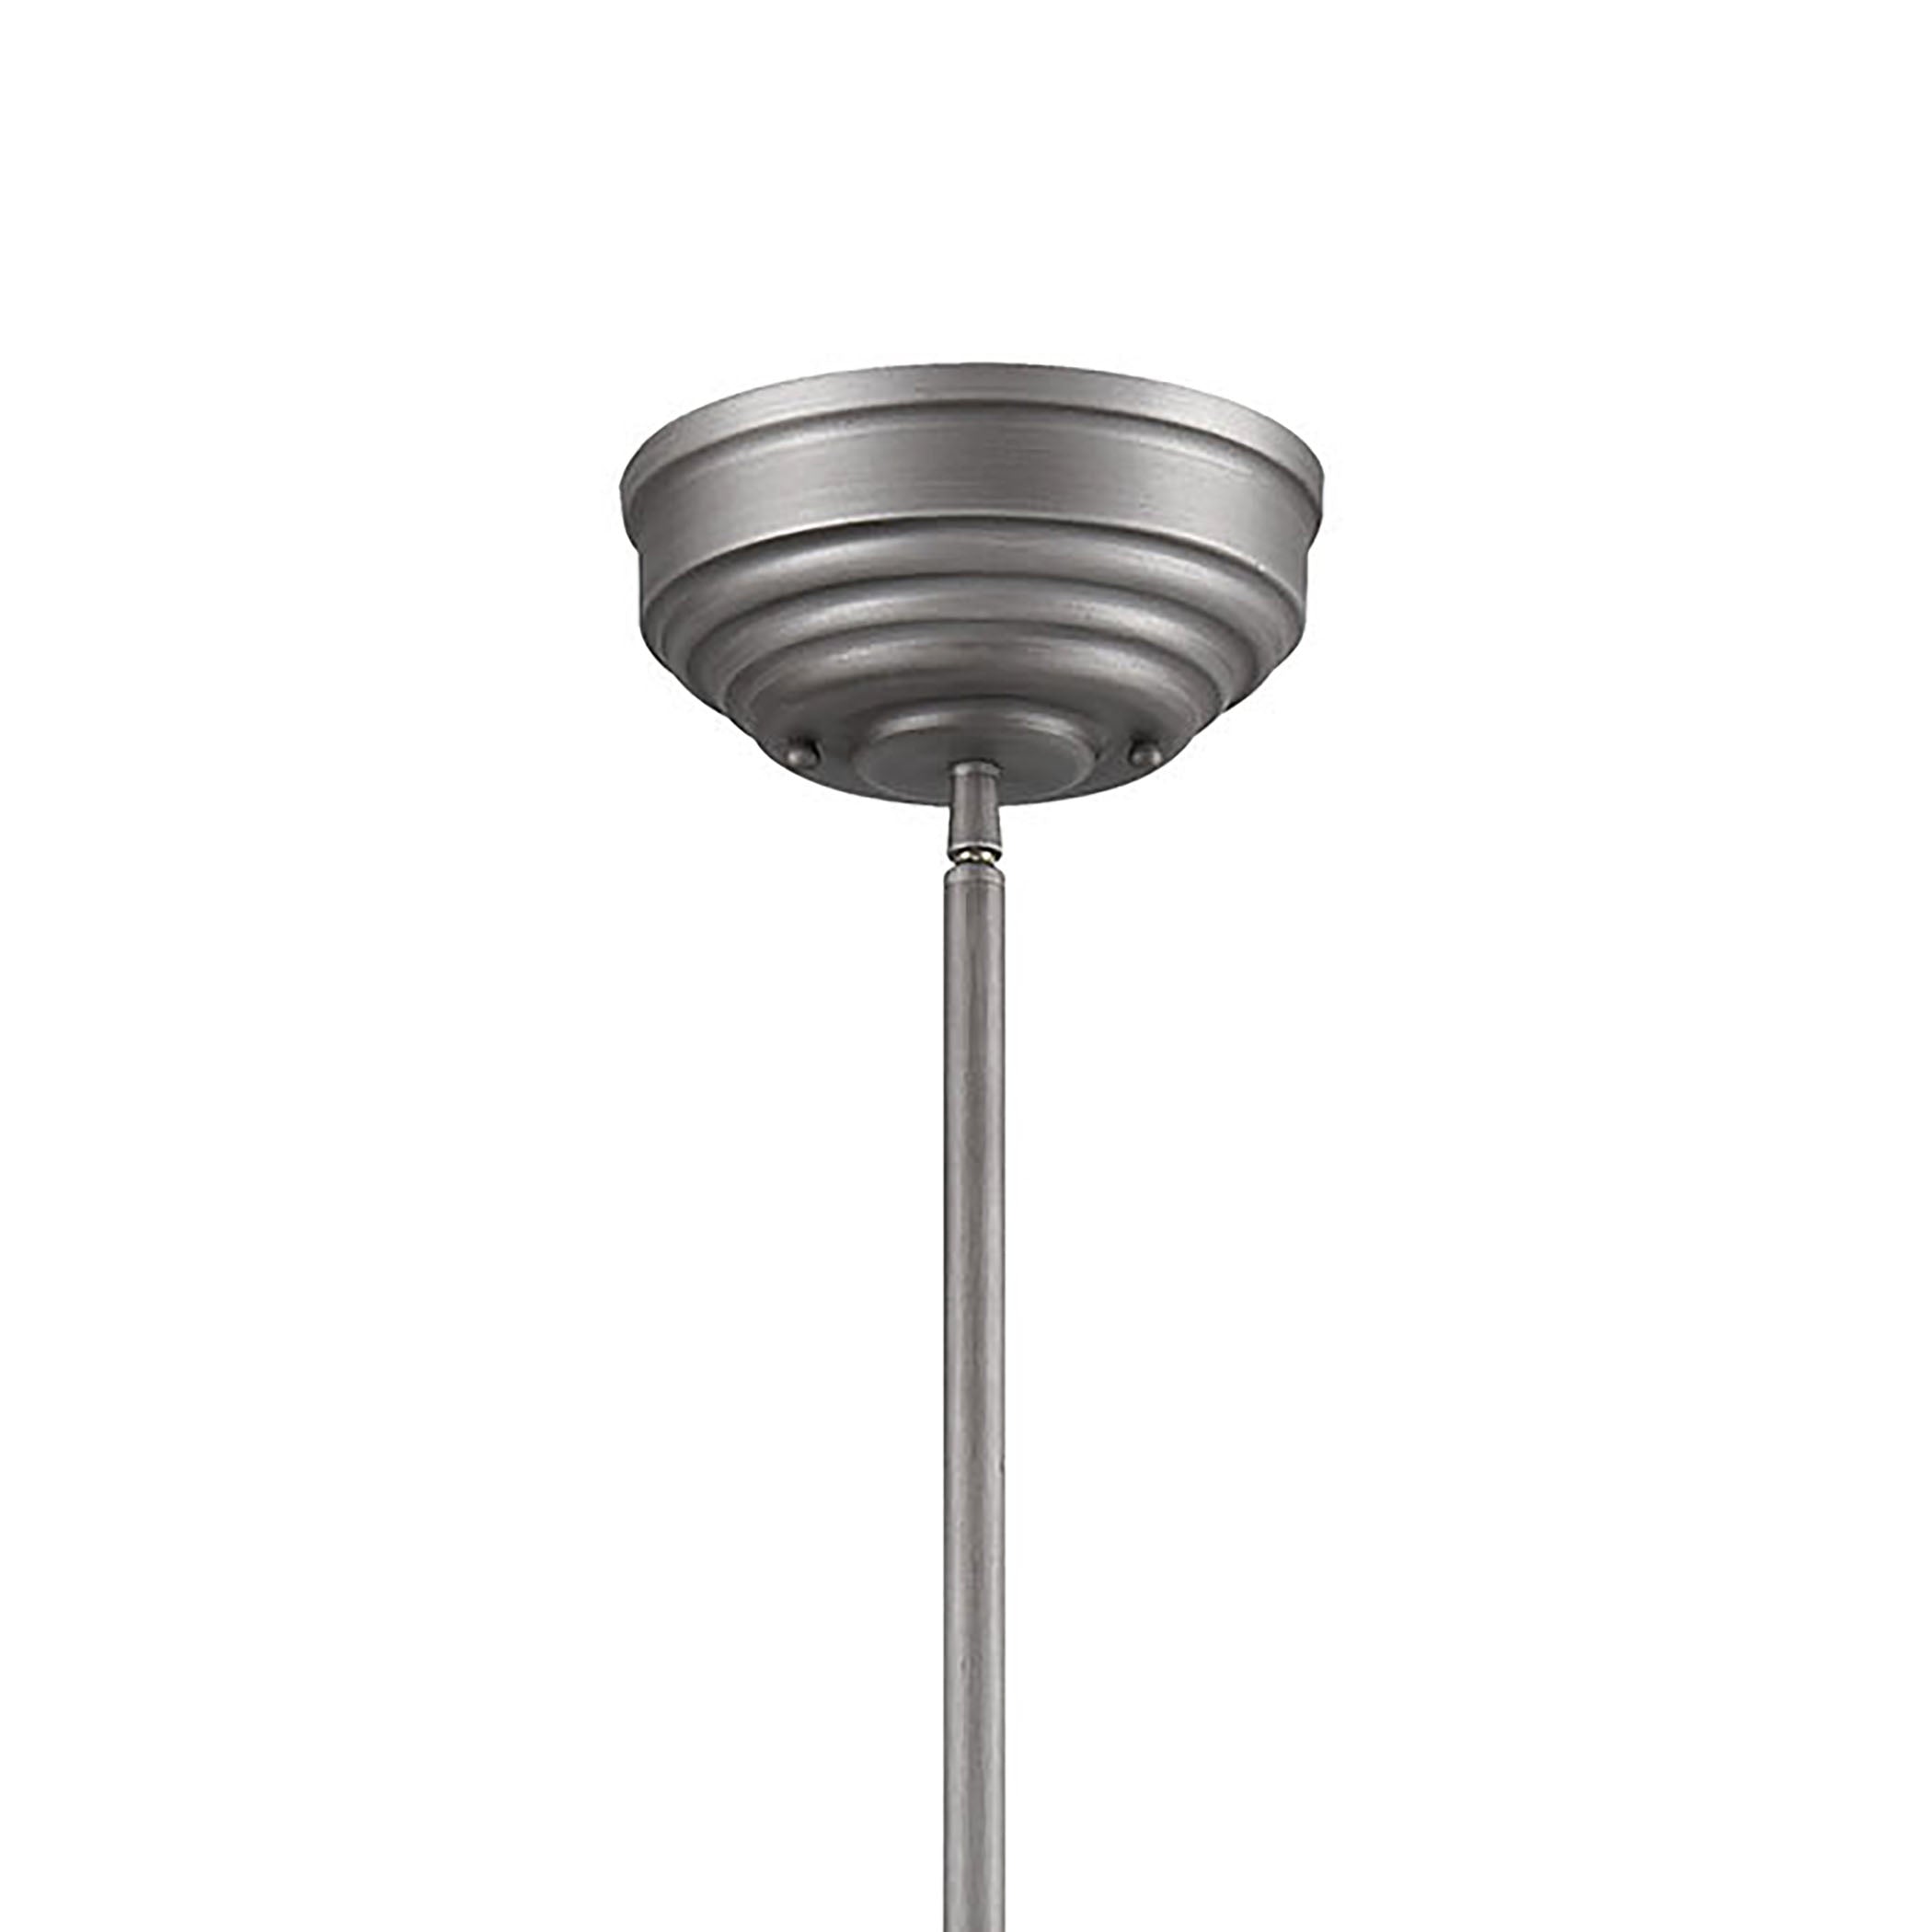 ELK Lighting 67237-3 Chadwick 3-Light Island Light in Weathered Zinc with Metal and Frosted Glass